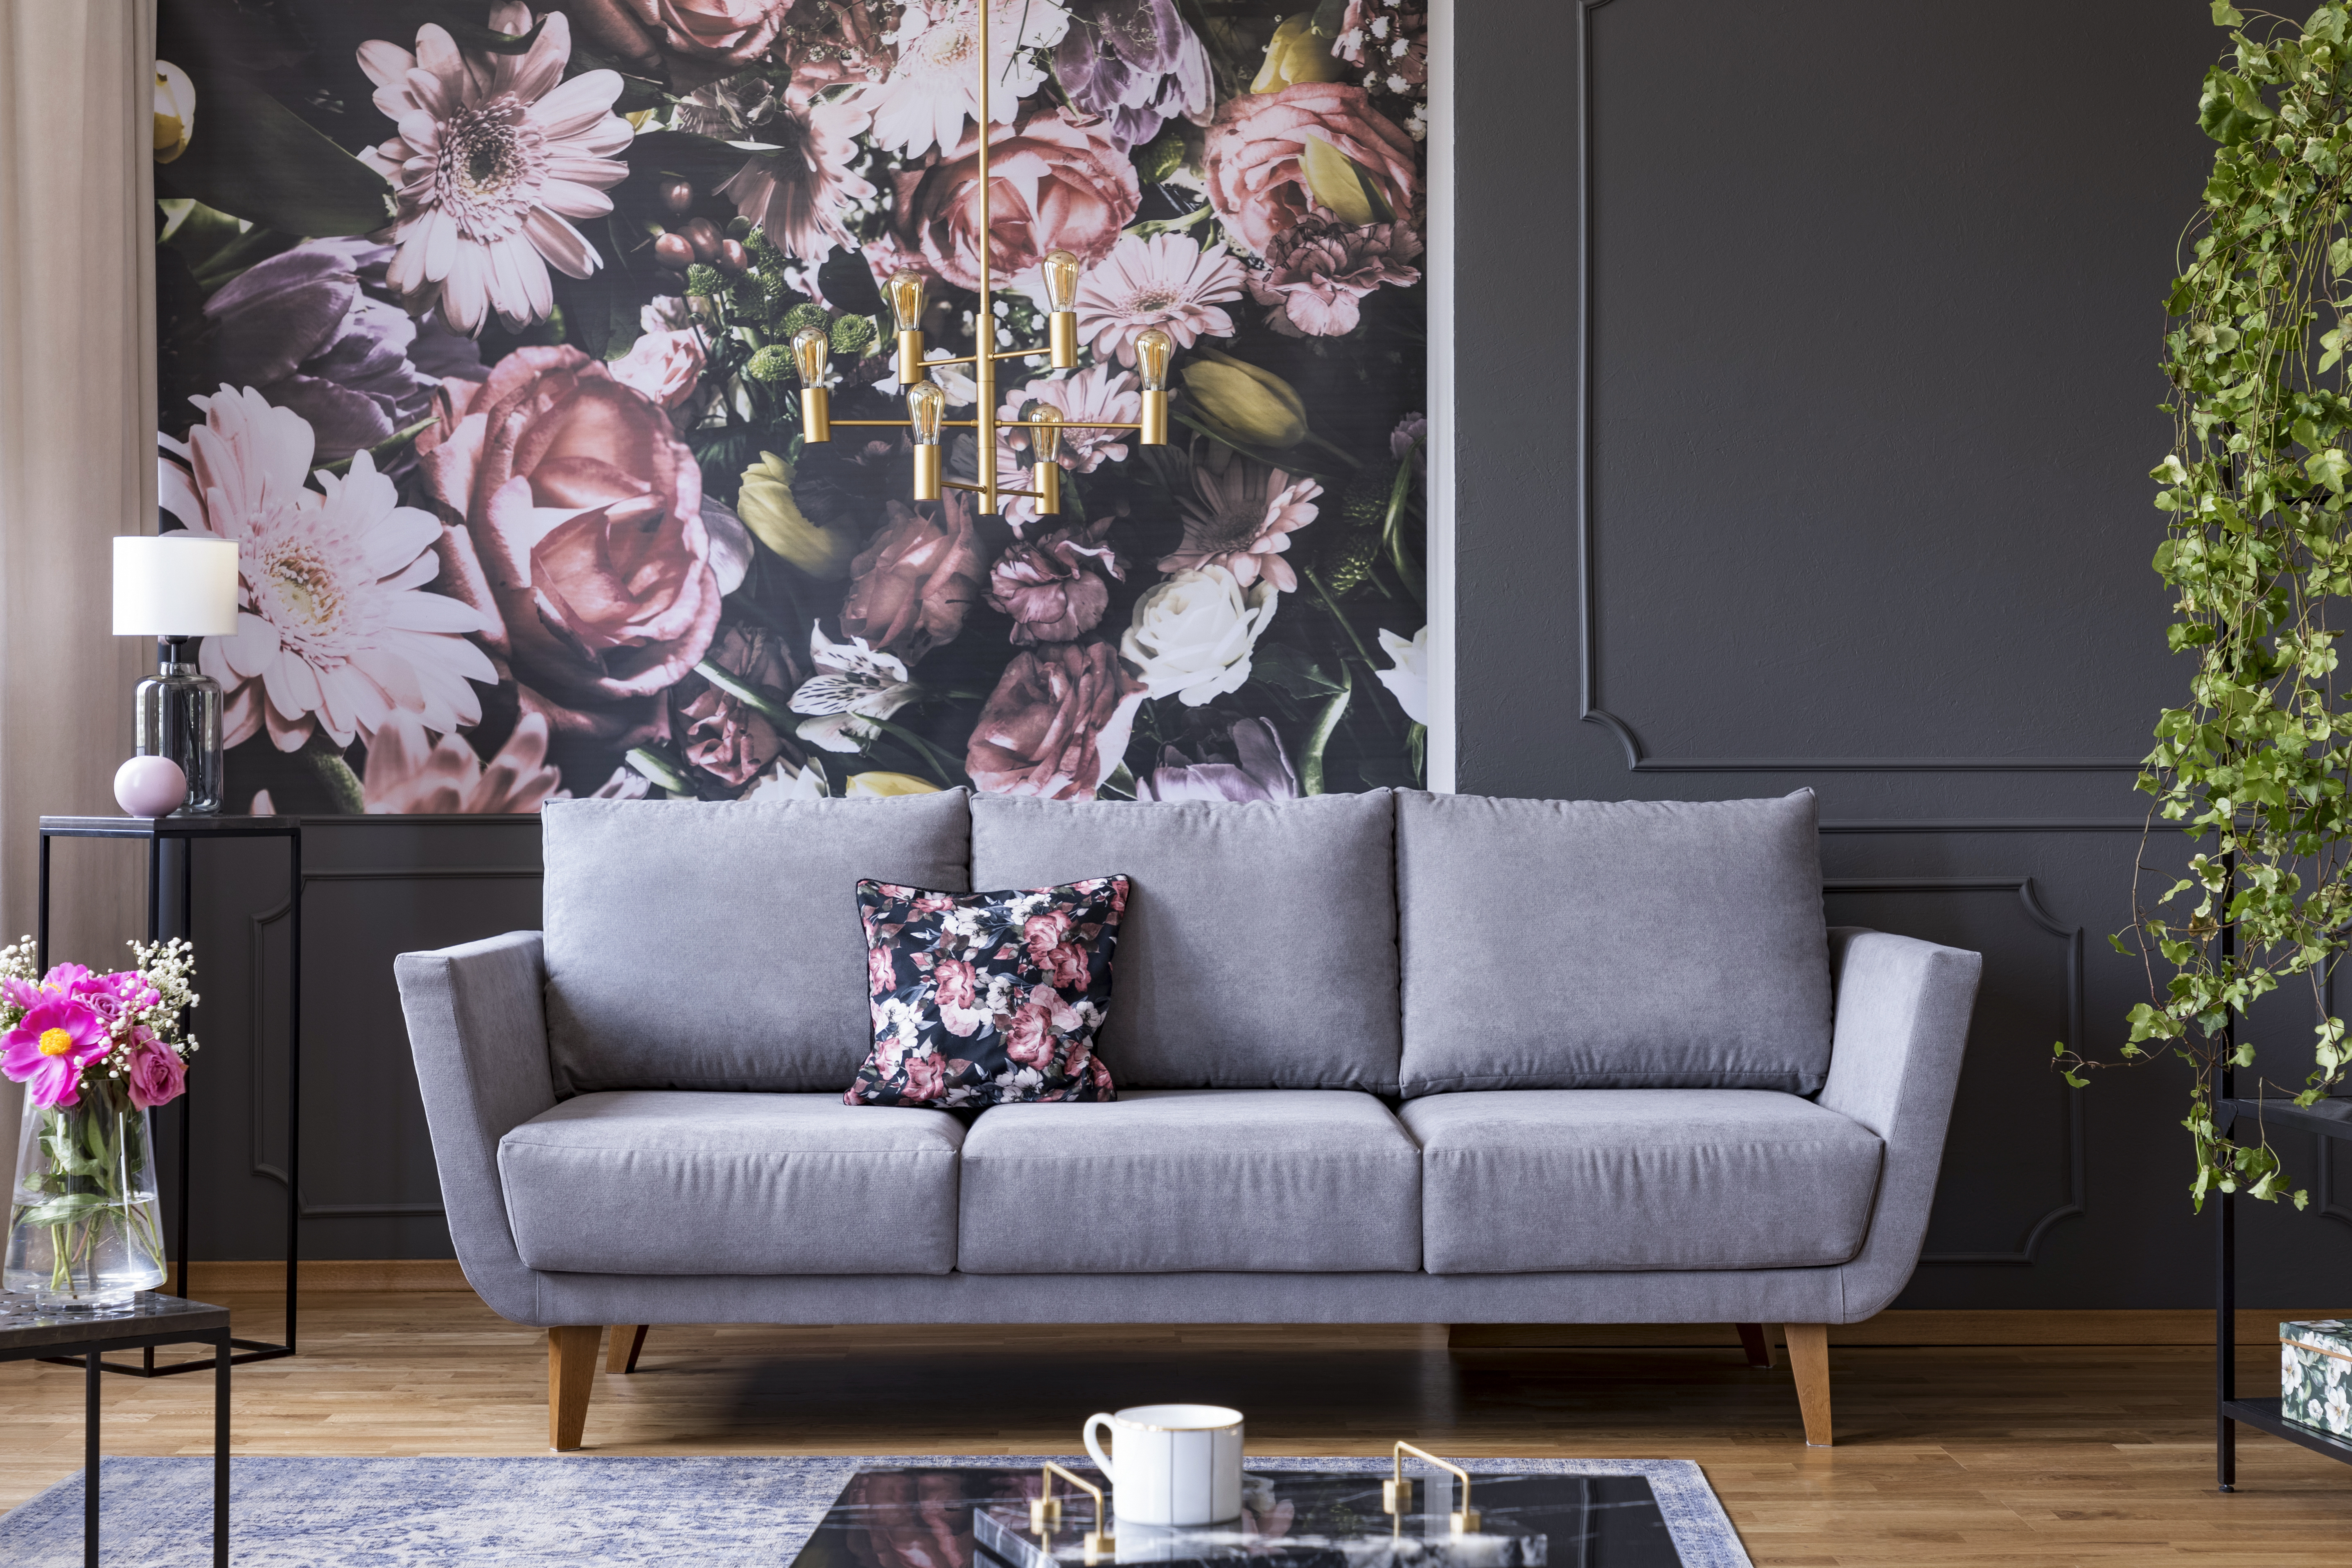 How To Achieve a Vintage Maximalist Look In 5 Steps